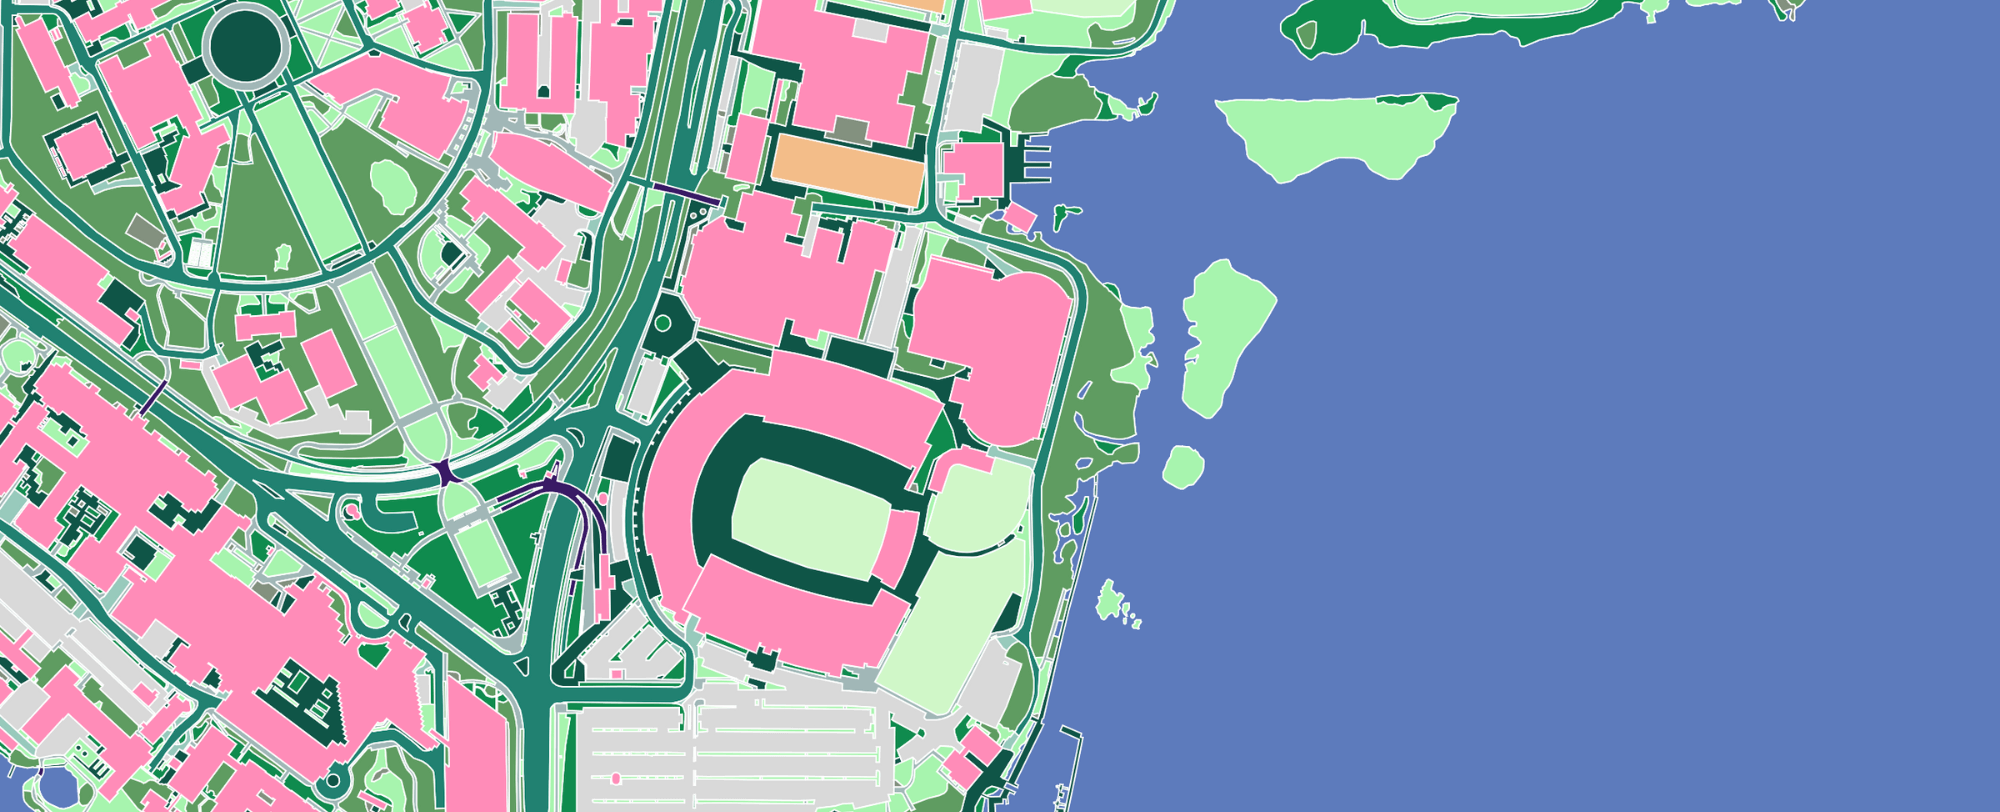 Land cover data in Seattle